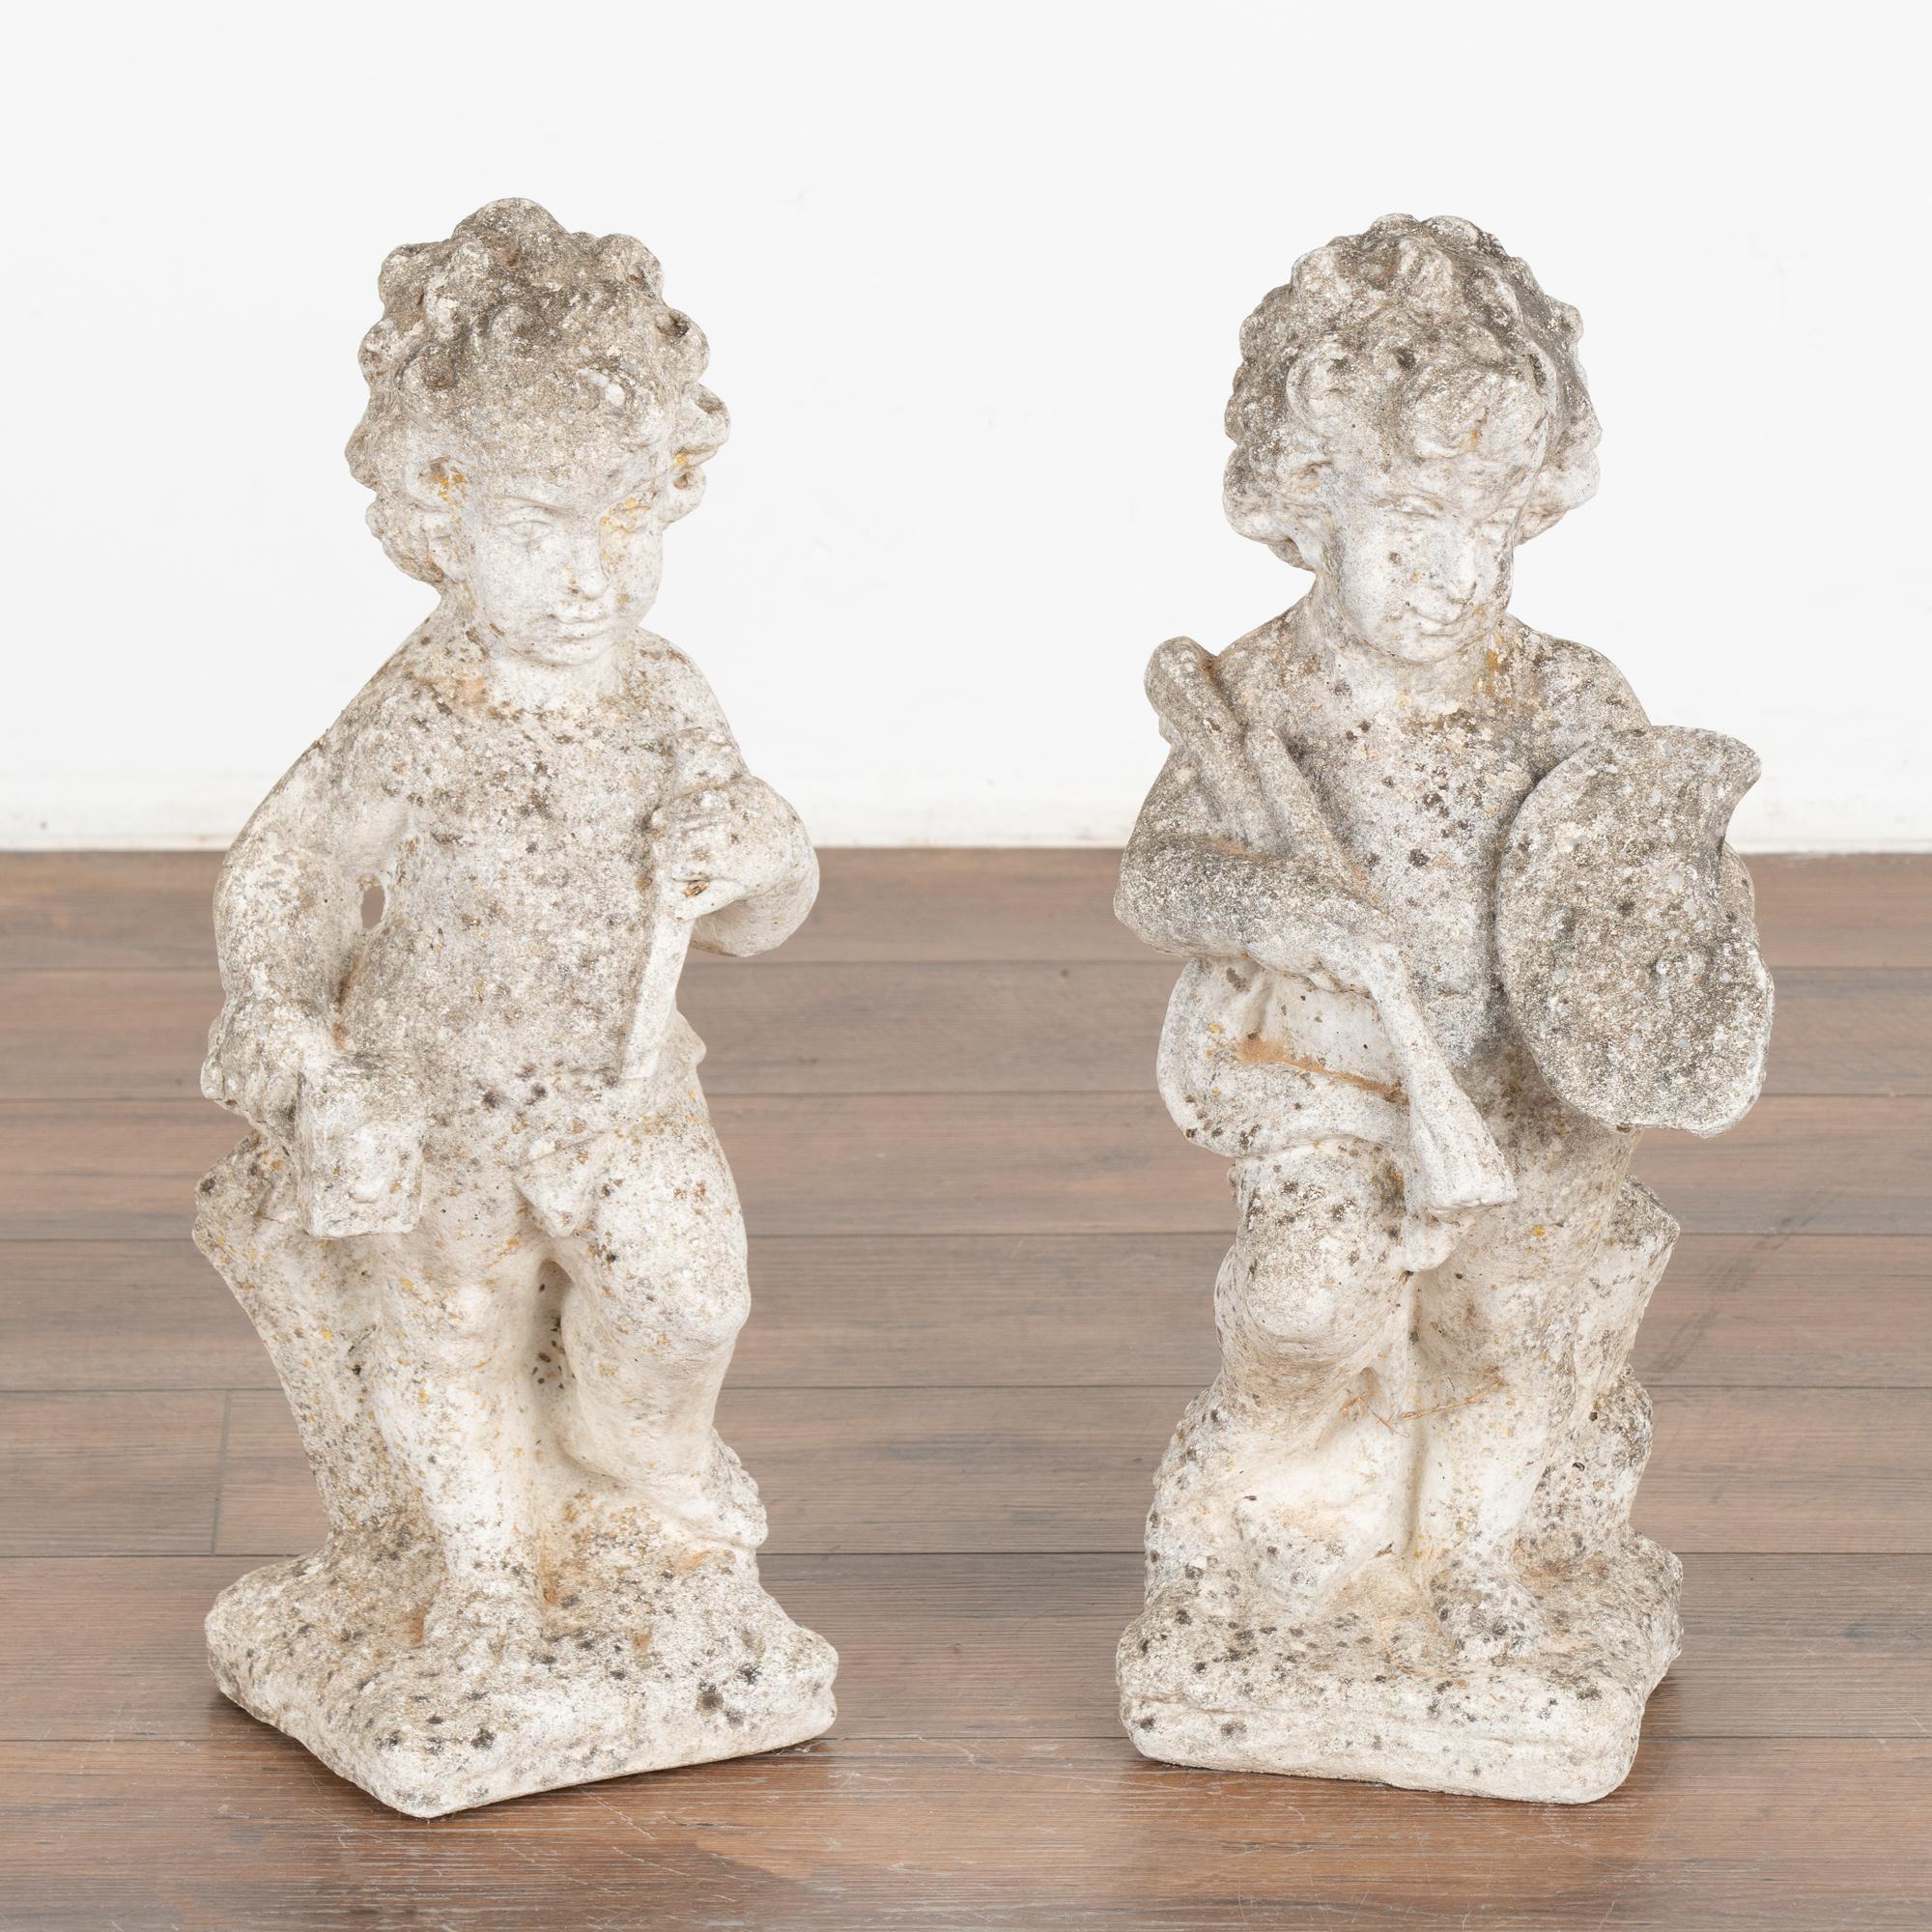 Pair of carved limestone garden sculptures. One putti is holding a mallet and chisel while the other holds a paint brush and artist's pallet. Note the fine details in the carved faces.
The worn patina reflects years of exposure outside in the